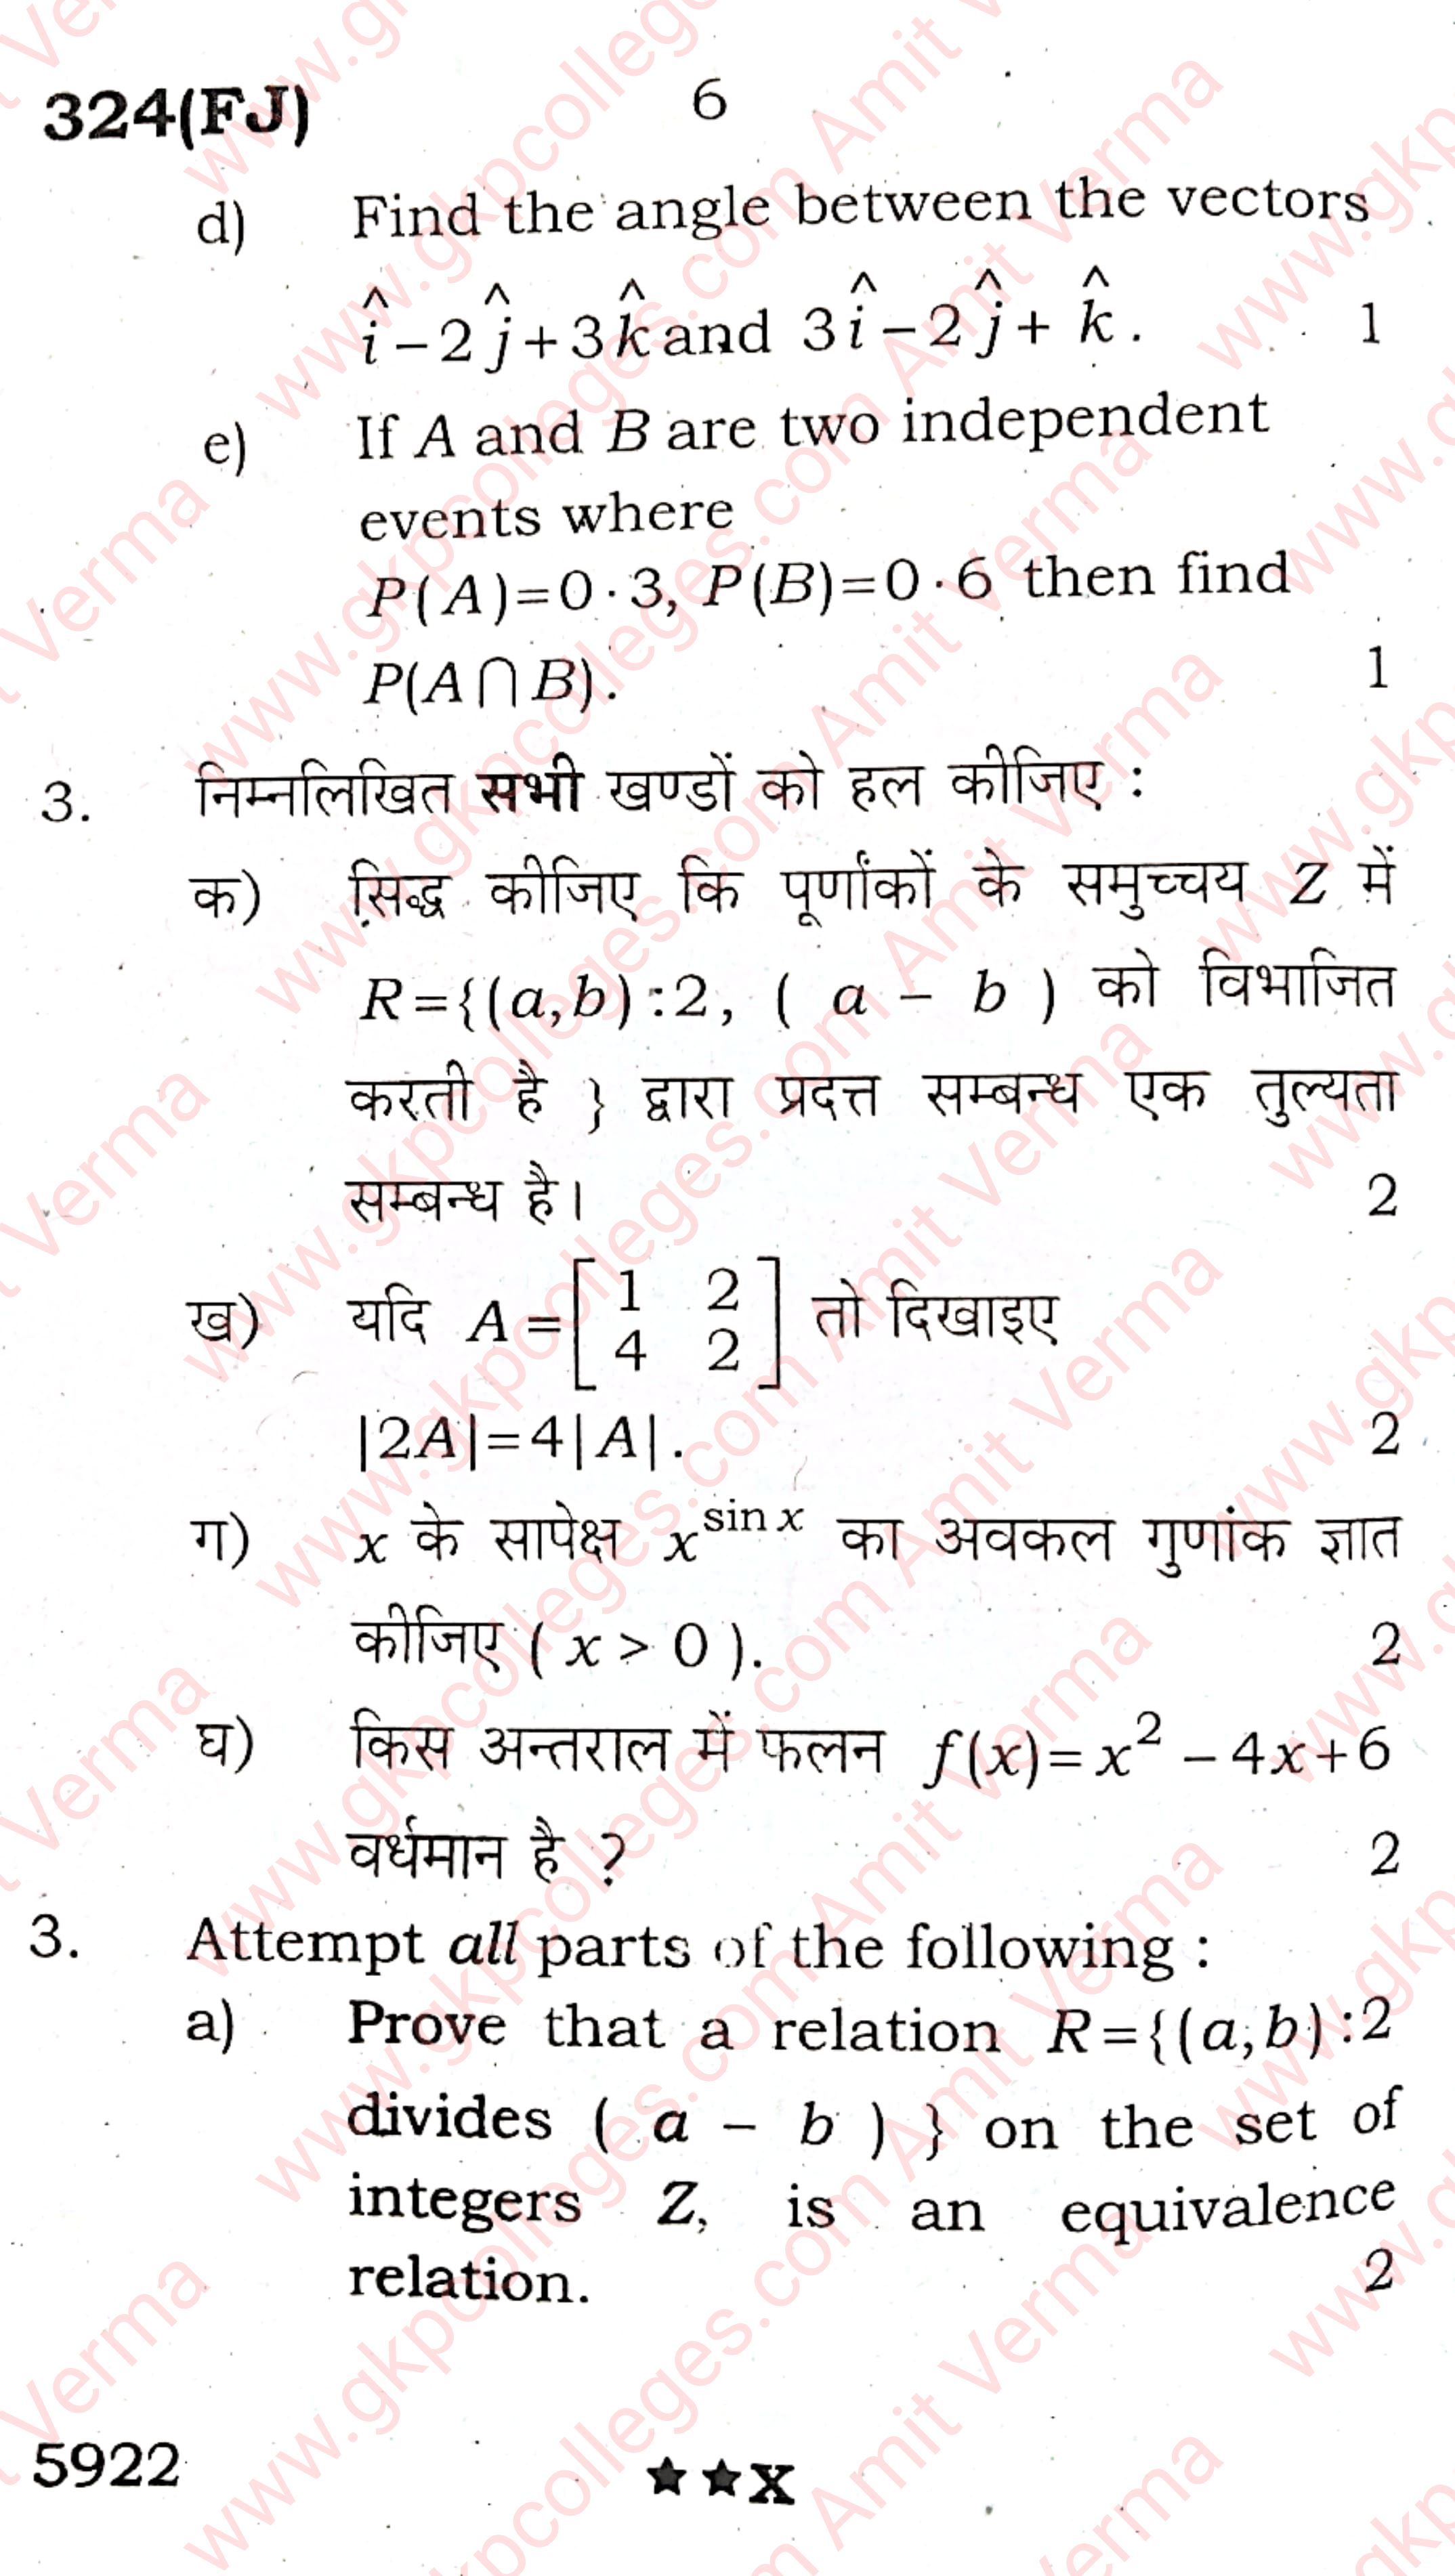 Mathematics (गणित), UP Board 12th Question Paper Code 324(FJ) with full solution